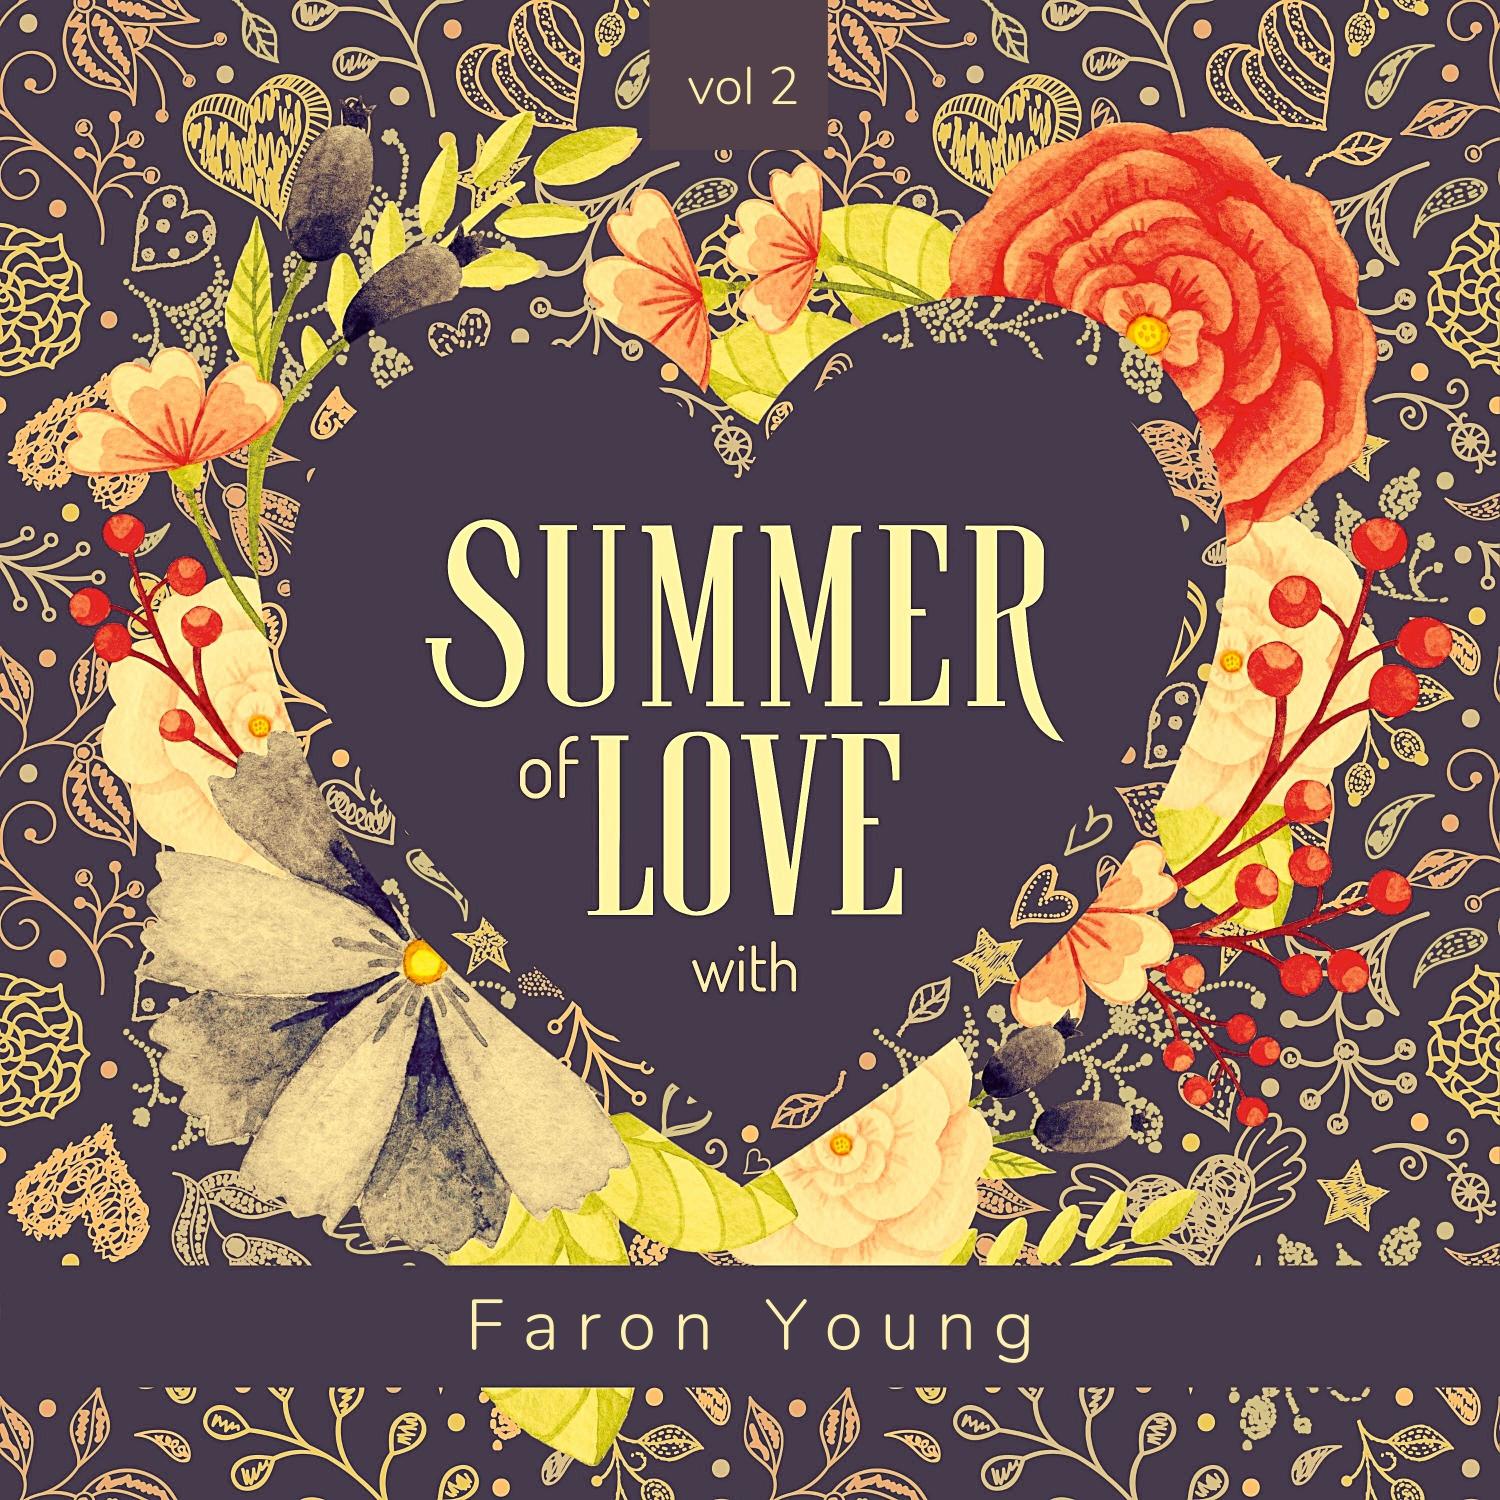 Faron Young - I Hate Myself (For Falling in Love with You) (Original Mix)